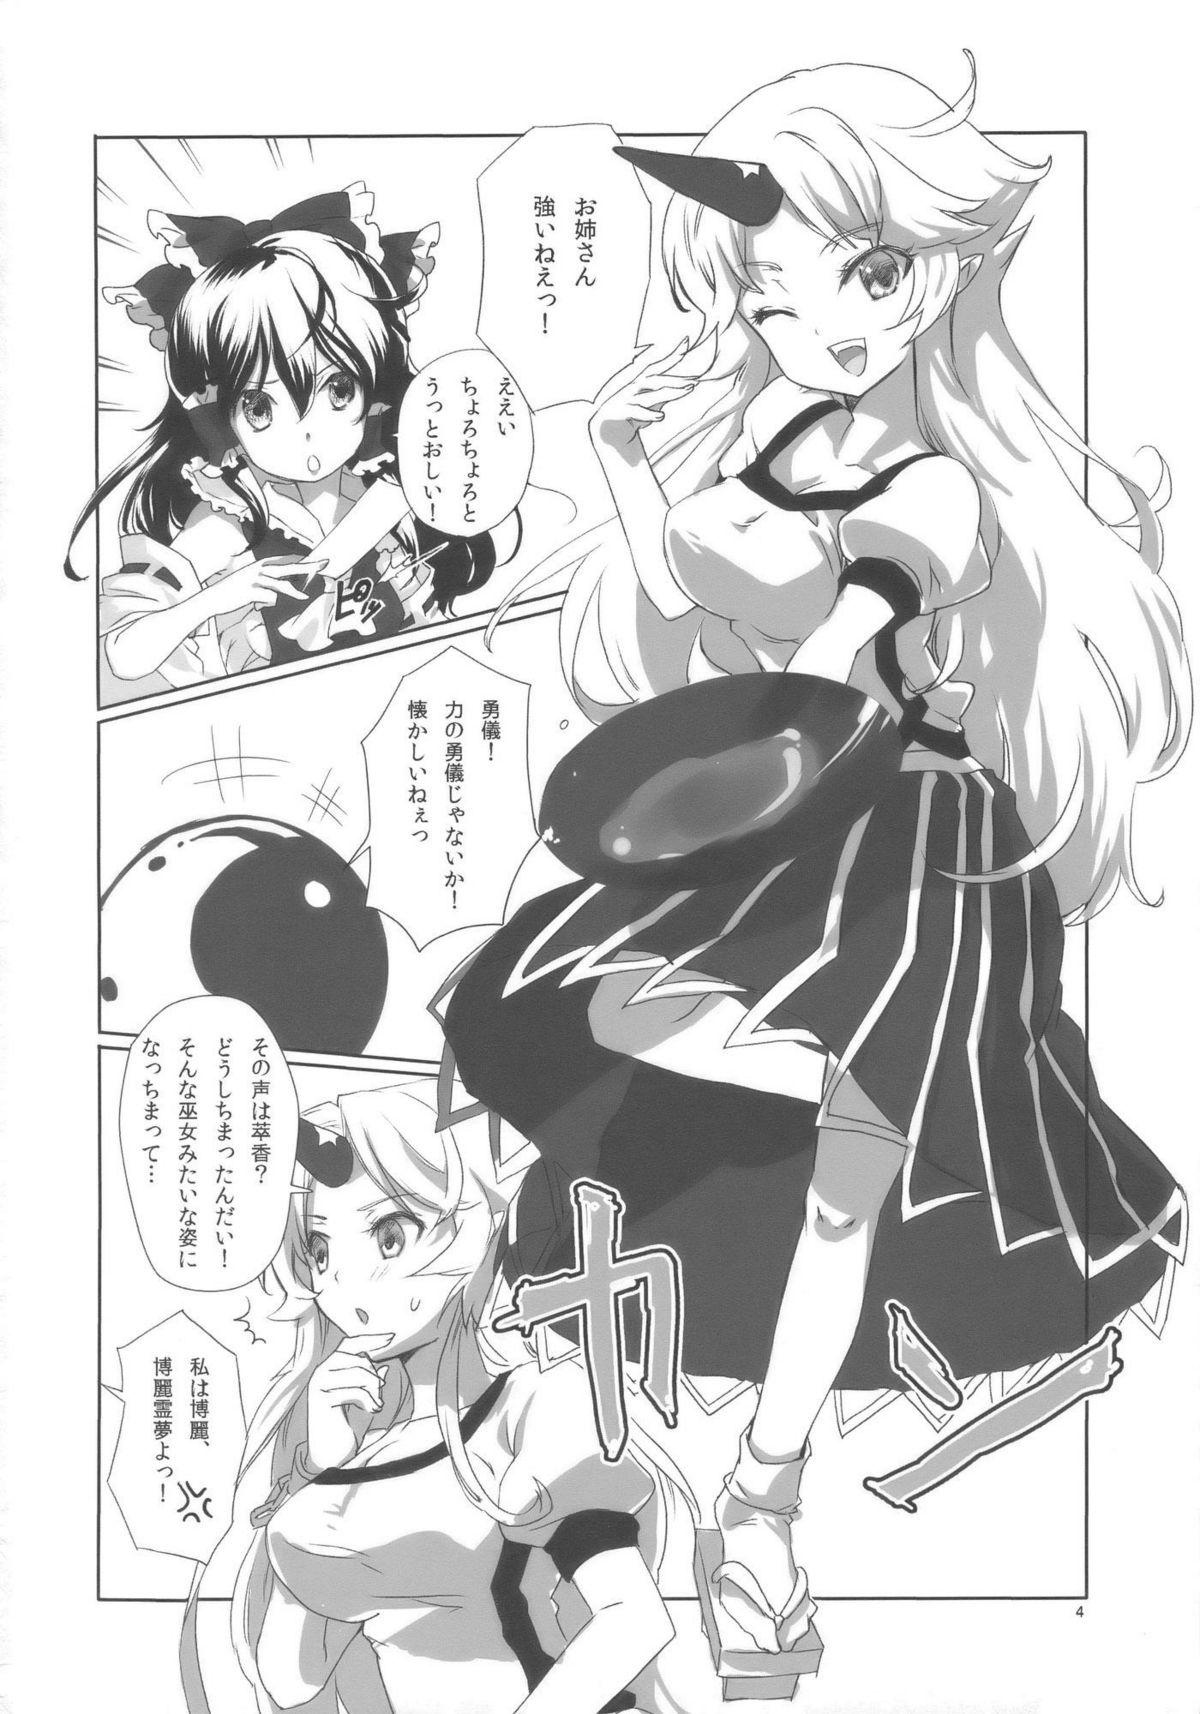 Old Vs Young Oni ha Ore no Yome! - Touhou project Edging - Page 4